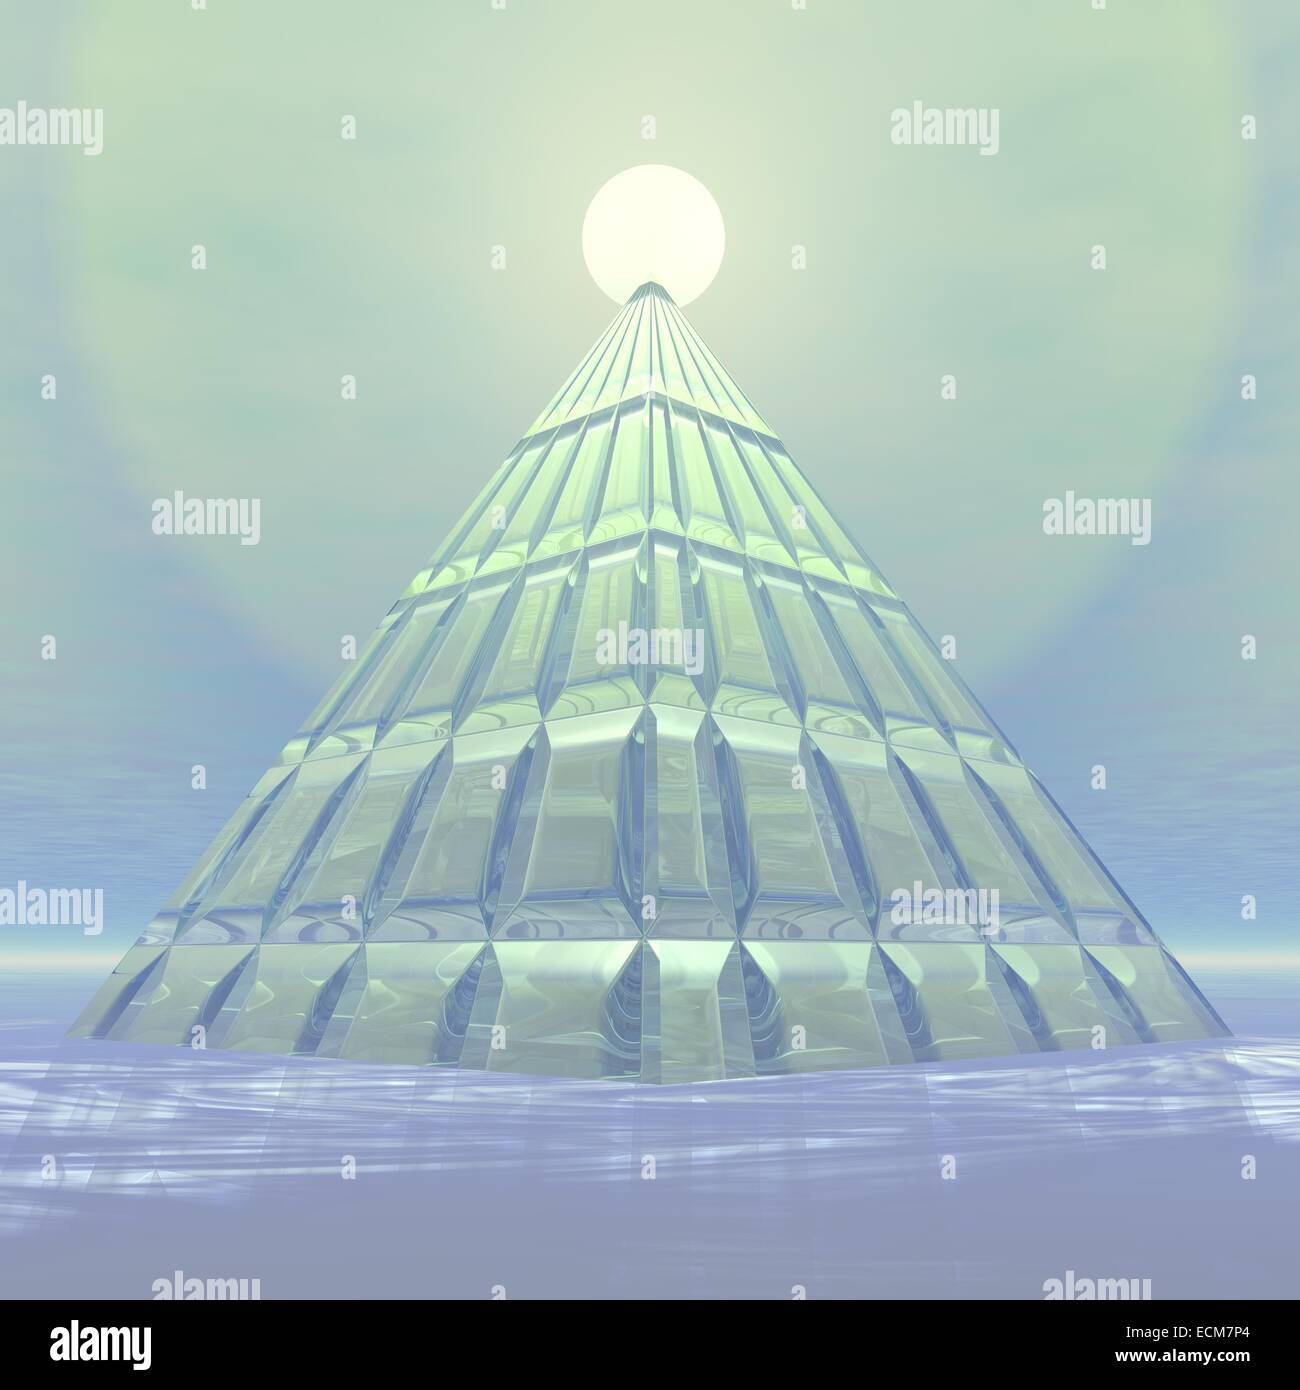 Transparent pyramid made with glass in front of clear sunset Stock Photo